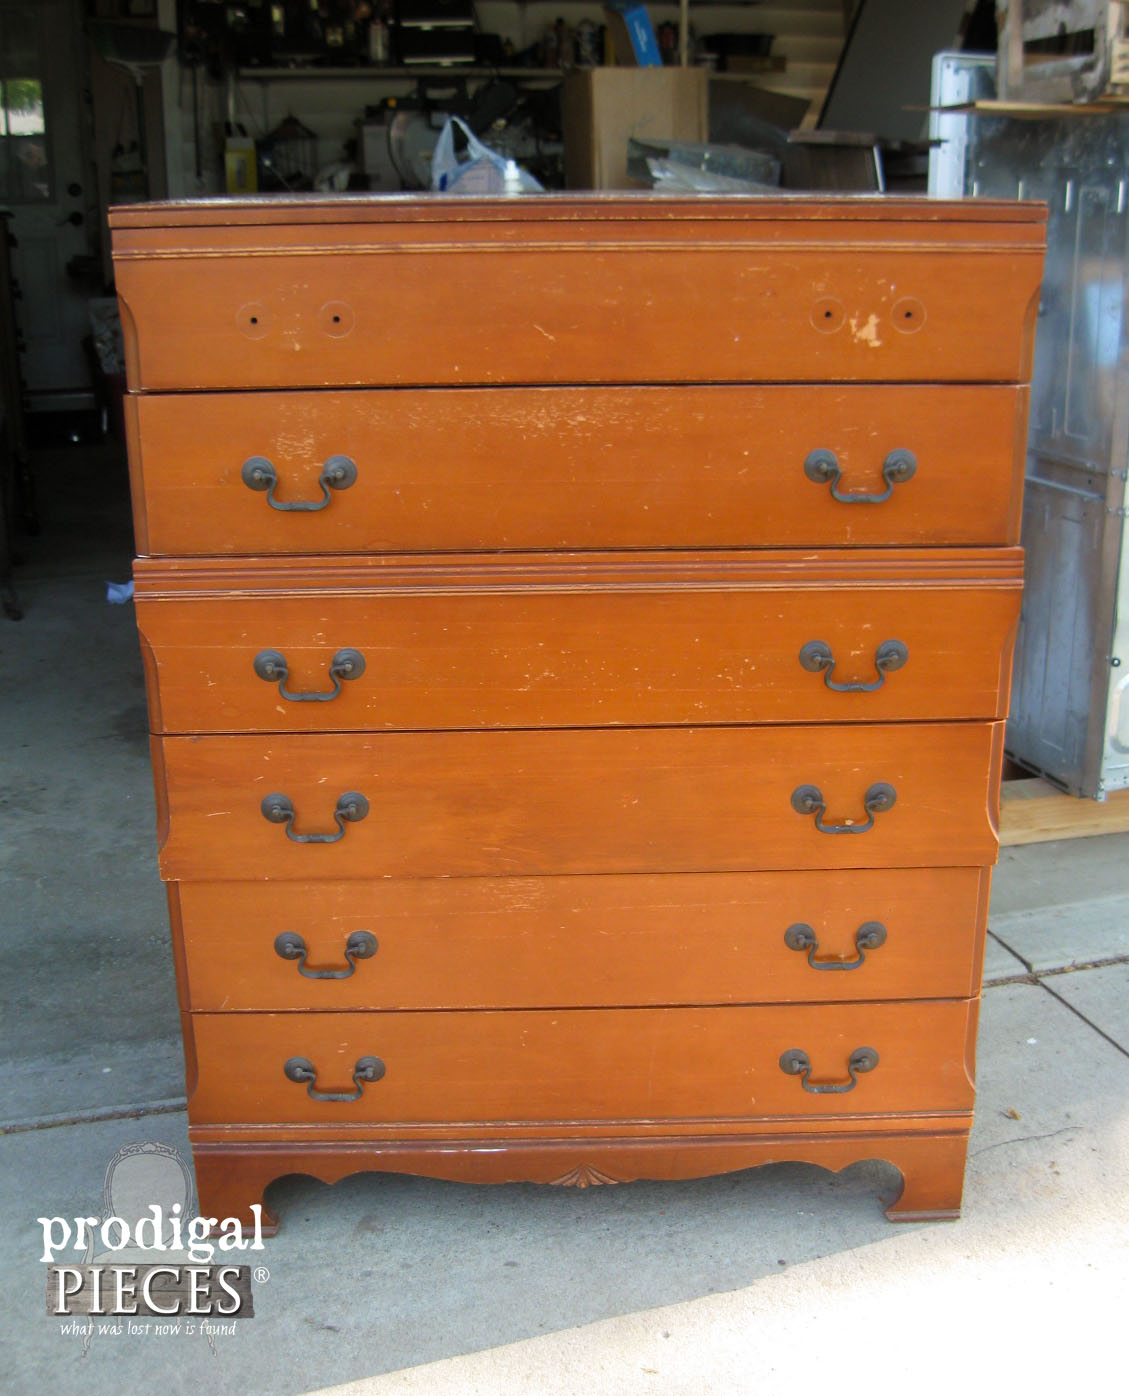 Vintage Mid Century Modern Mengel Chest of Drawers Before Makeover by Prodigal Pieces | www.prodigalpieces.com